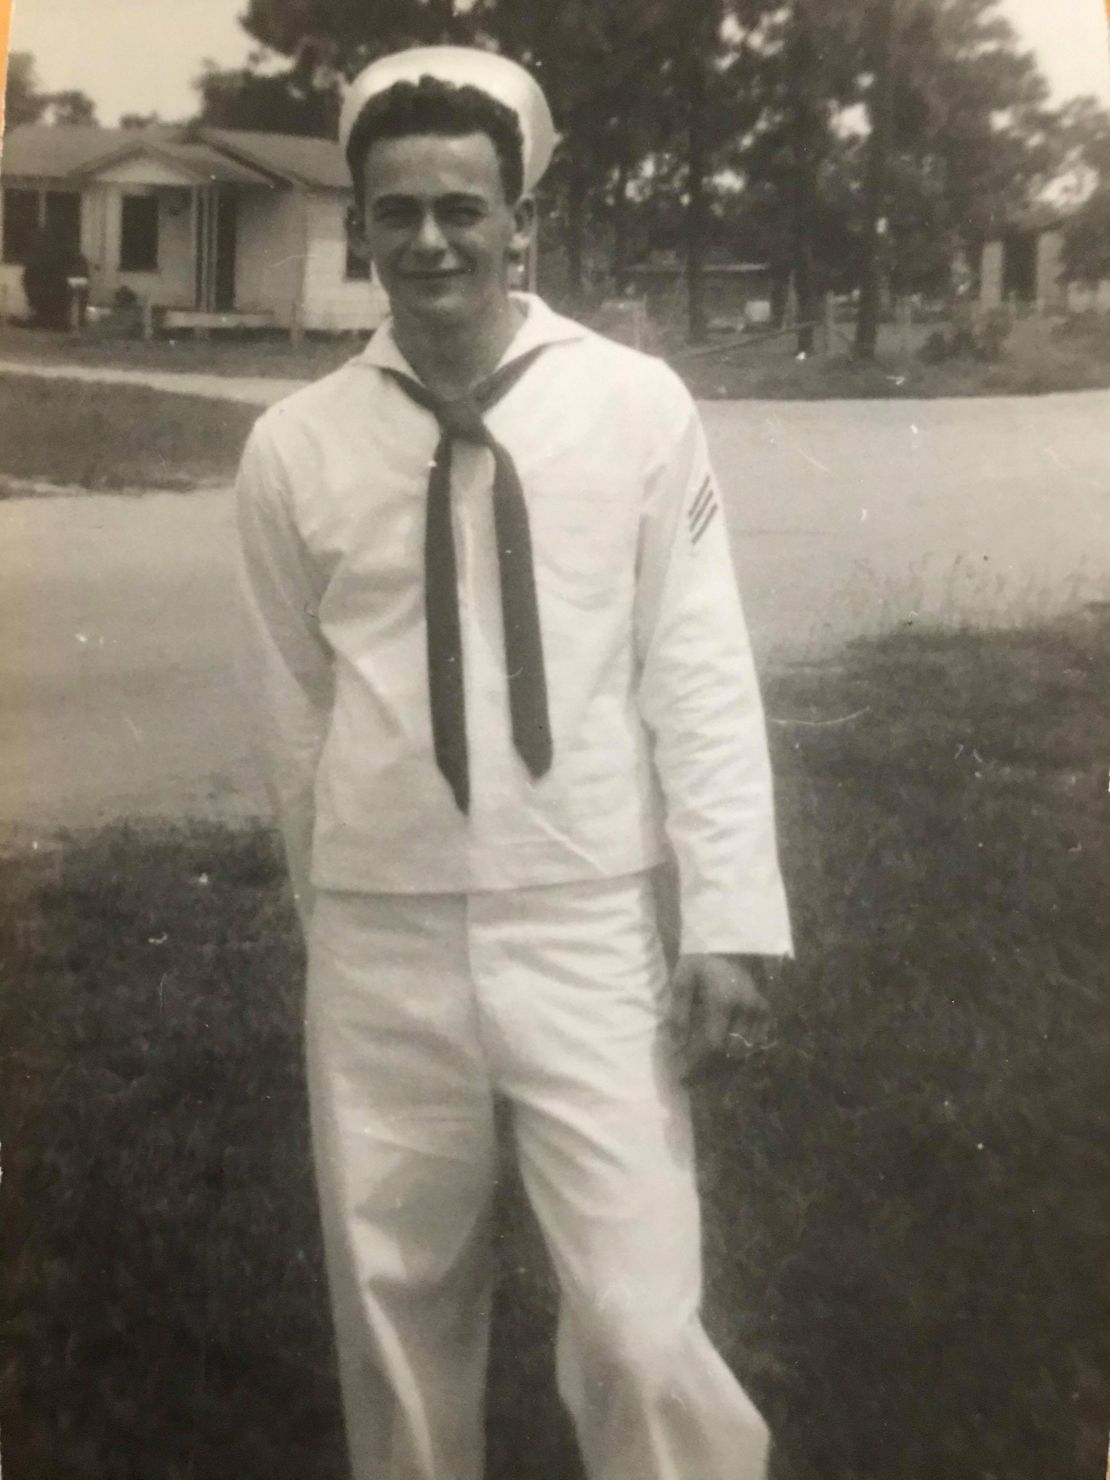 Shown here is James Mandeville when he served in the US Navy.